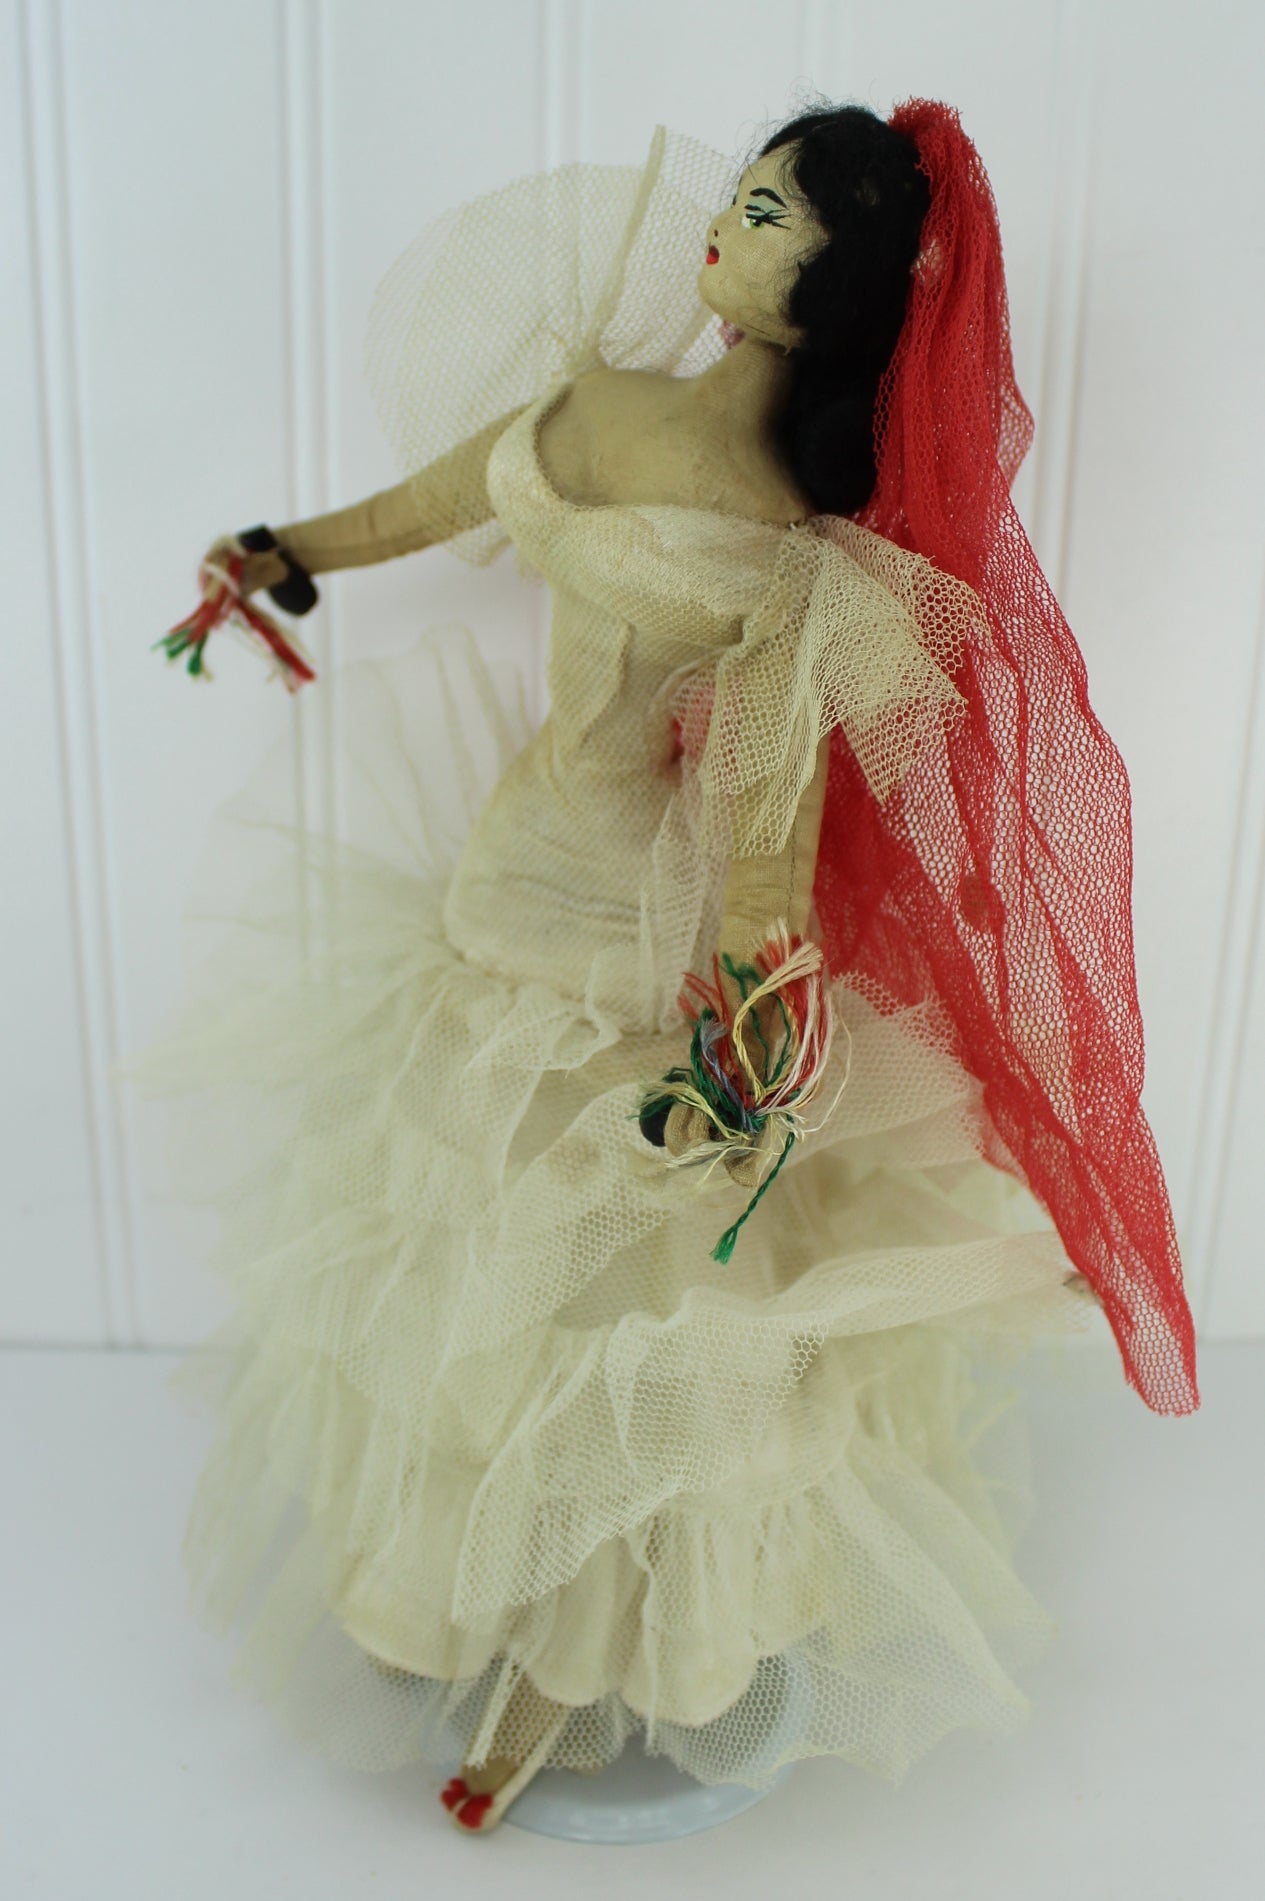 Gorgeous Sexy Klumpe Doll Layna Fantastic Face Flamenco Dancer Buxom Beauty Spain charming collectible doll